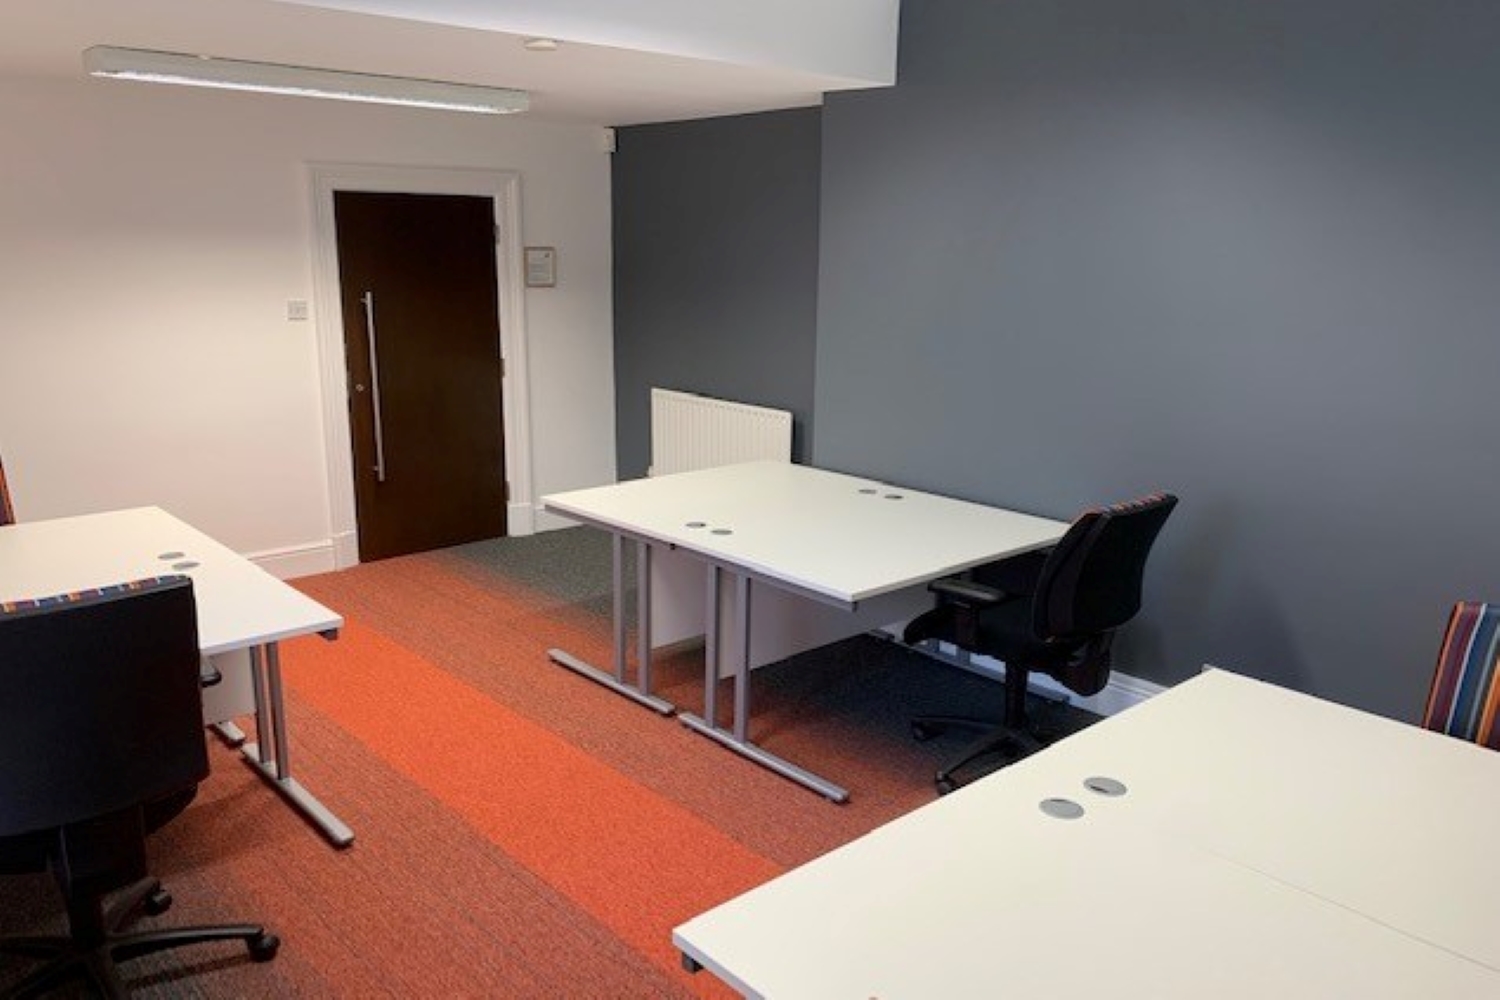 Serviced offices in Castle Donington, Derbyshire